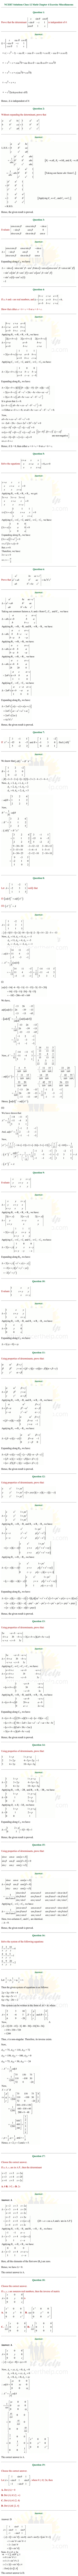 ncert solutions for class 12 Math Chapter 4 Miscellaneous 